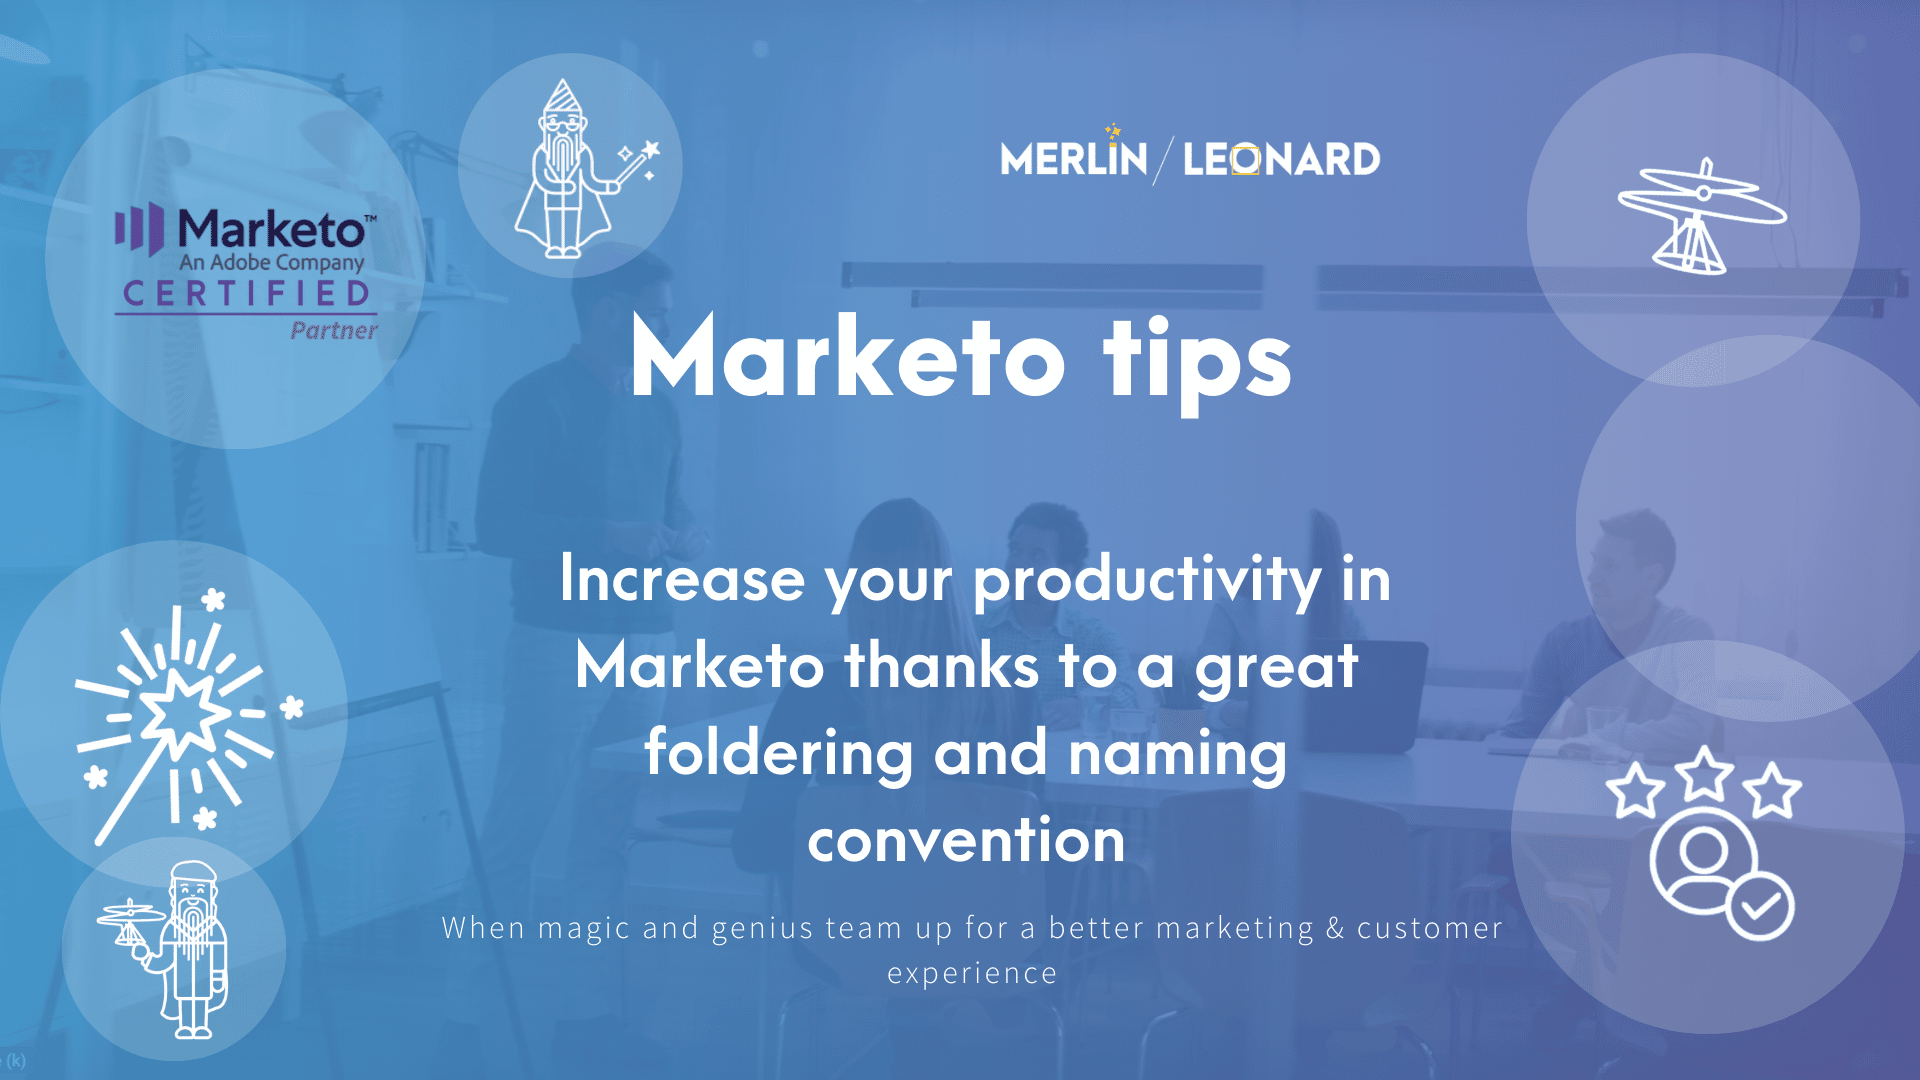 Increase your productivity in Marketo thanks to a great foldering and naming convention